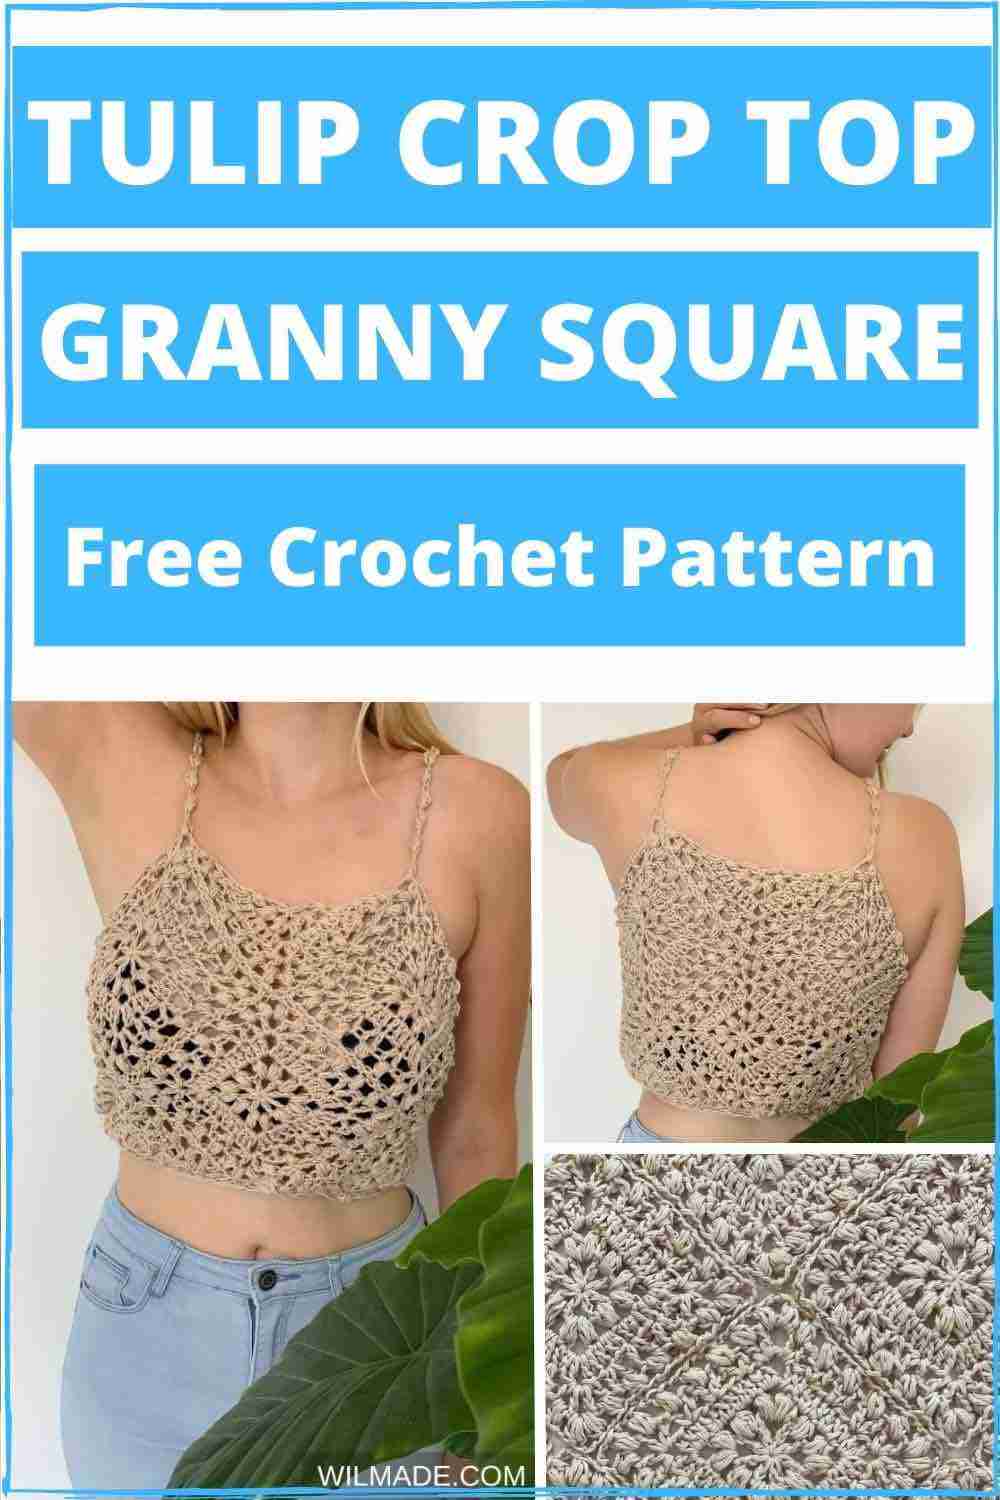 SUMMER-CROCHET-TOPS-FREE-PATTERNS-GRANNY SQUARE-CROP-TOP